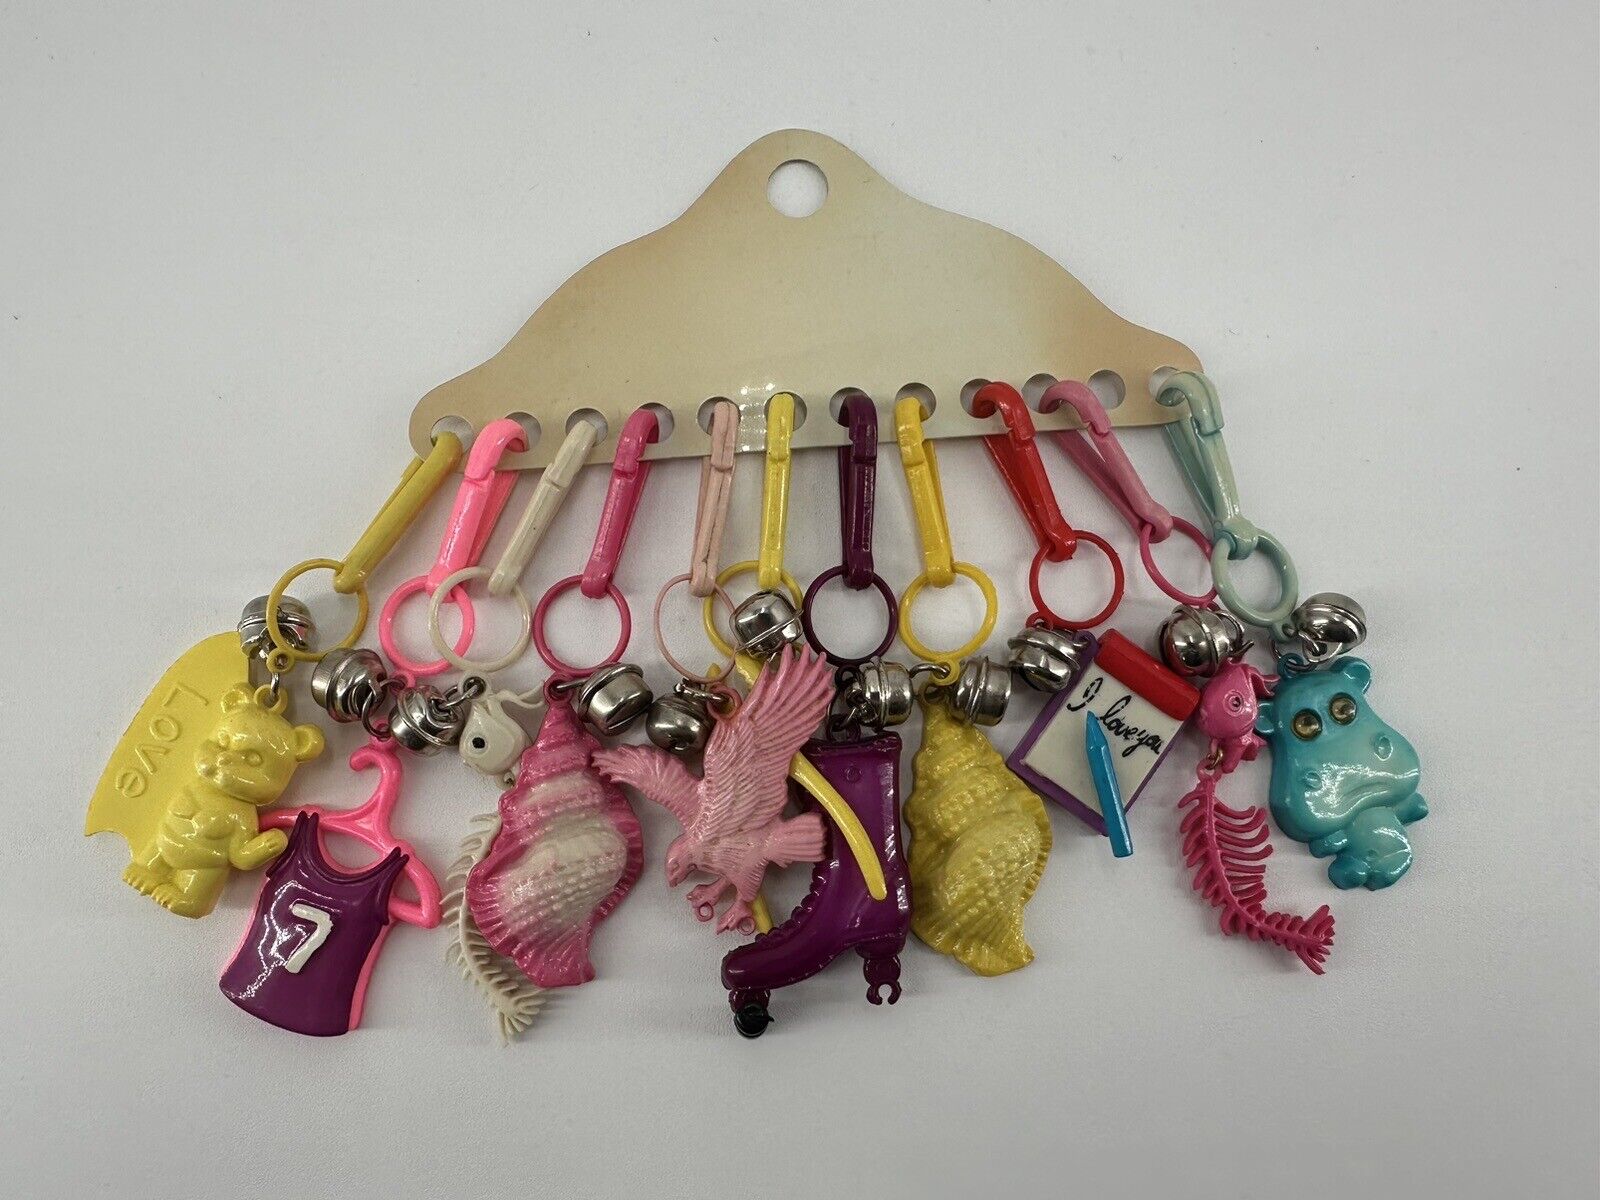 VTG CARDED 1980’s BELL CLIP CHARMS FOR NECKLACES 11 PLASTIC TOY NECKLACE CHARMS